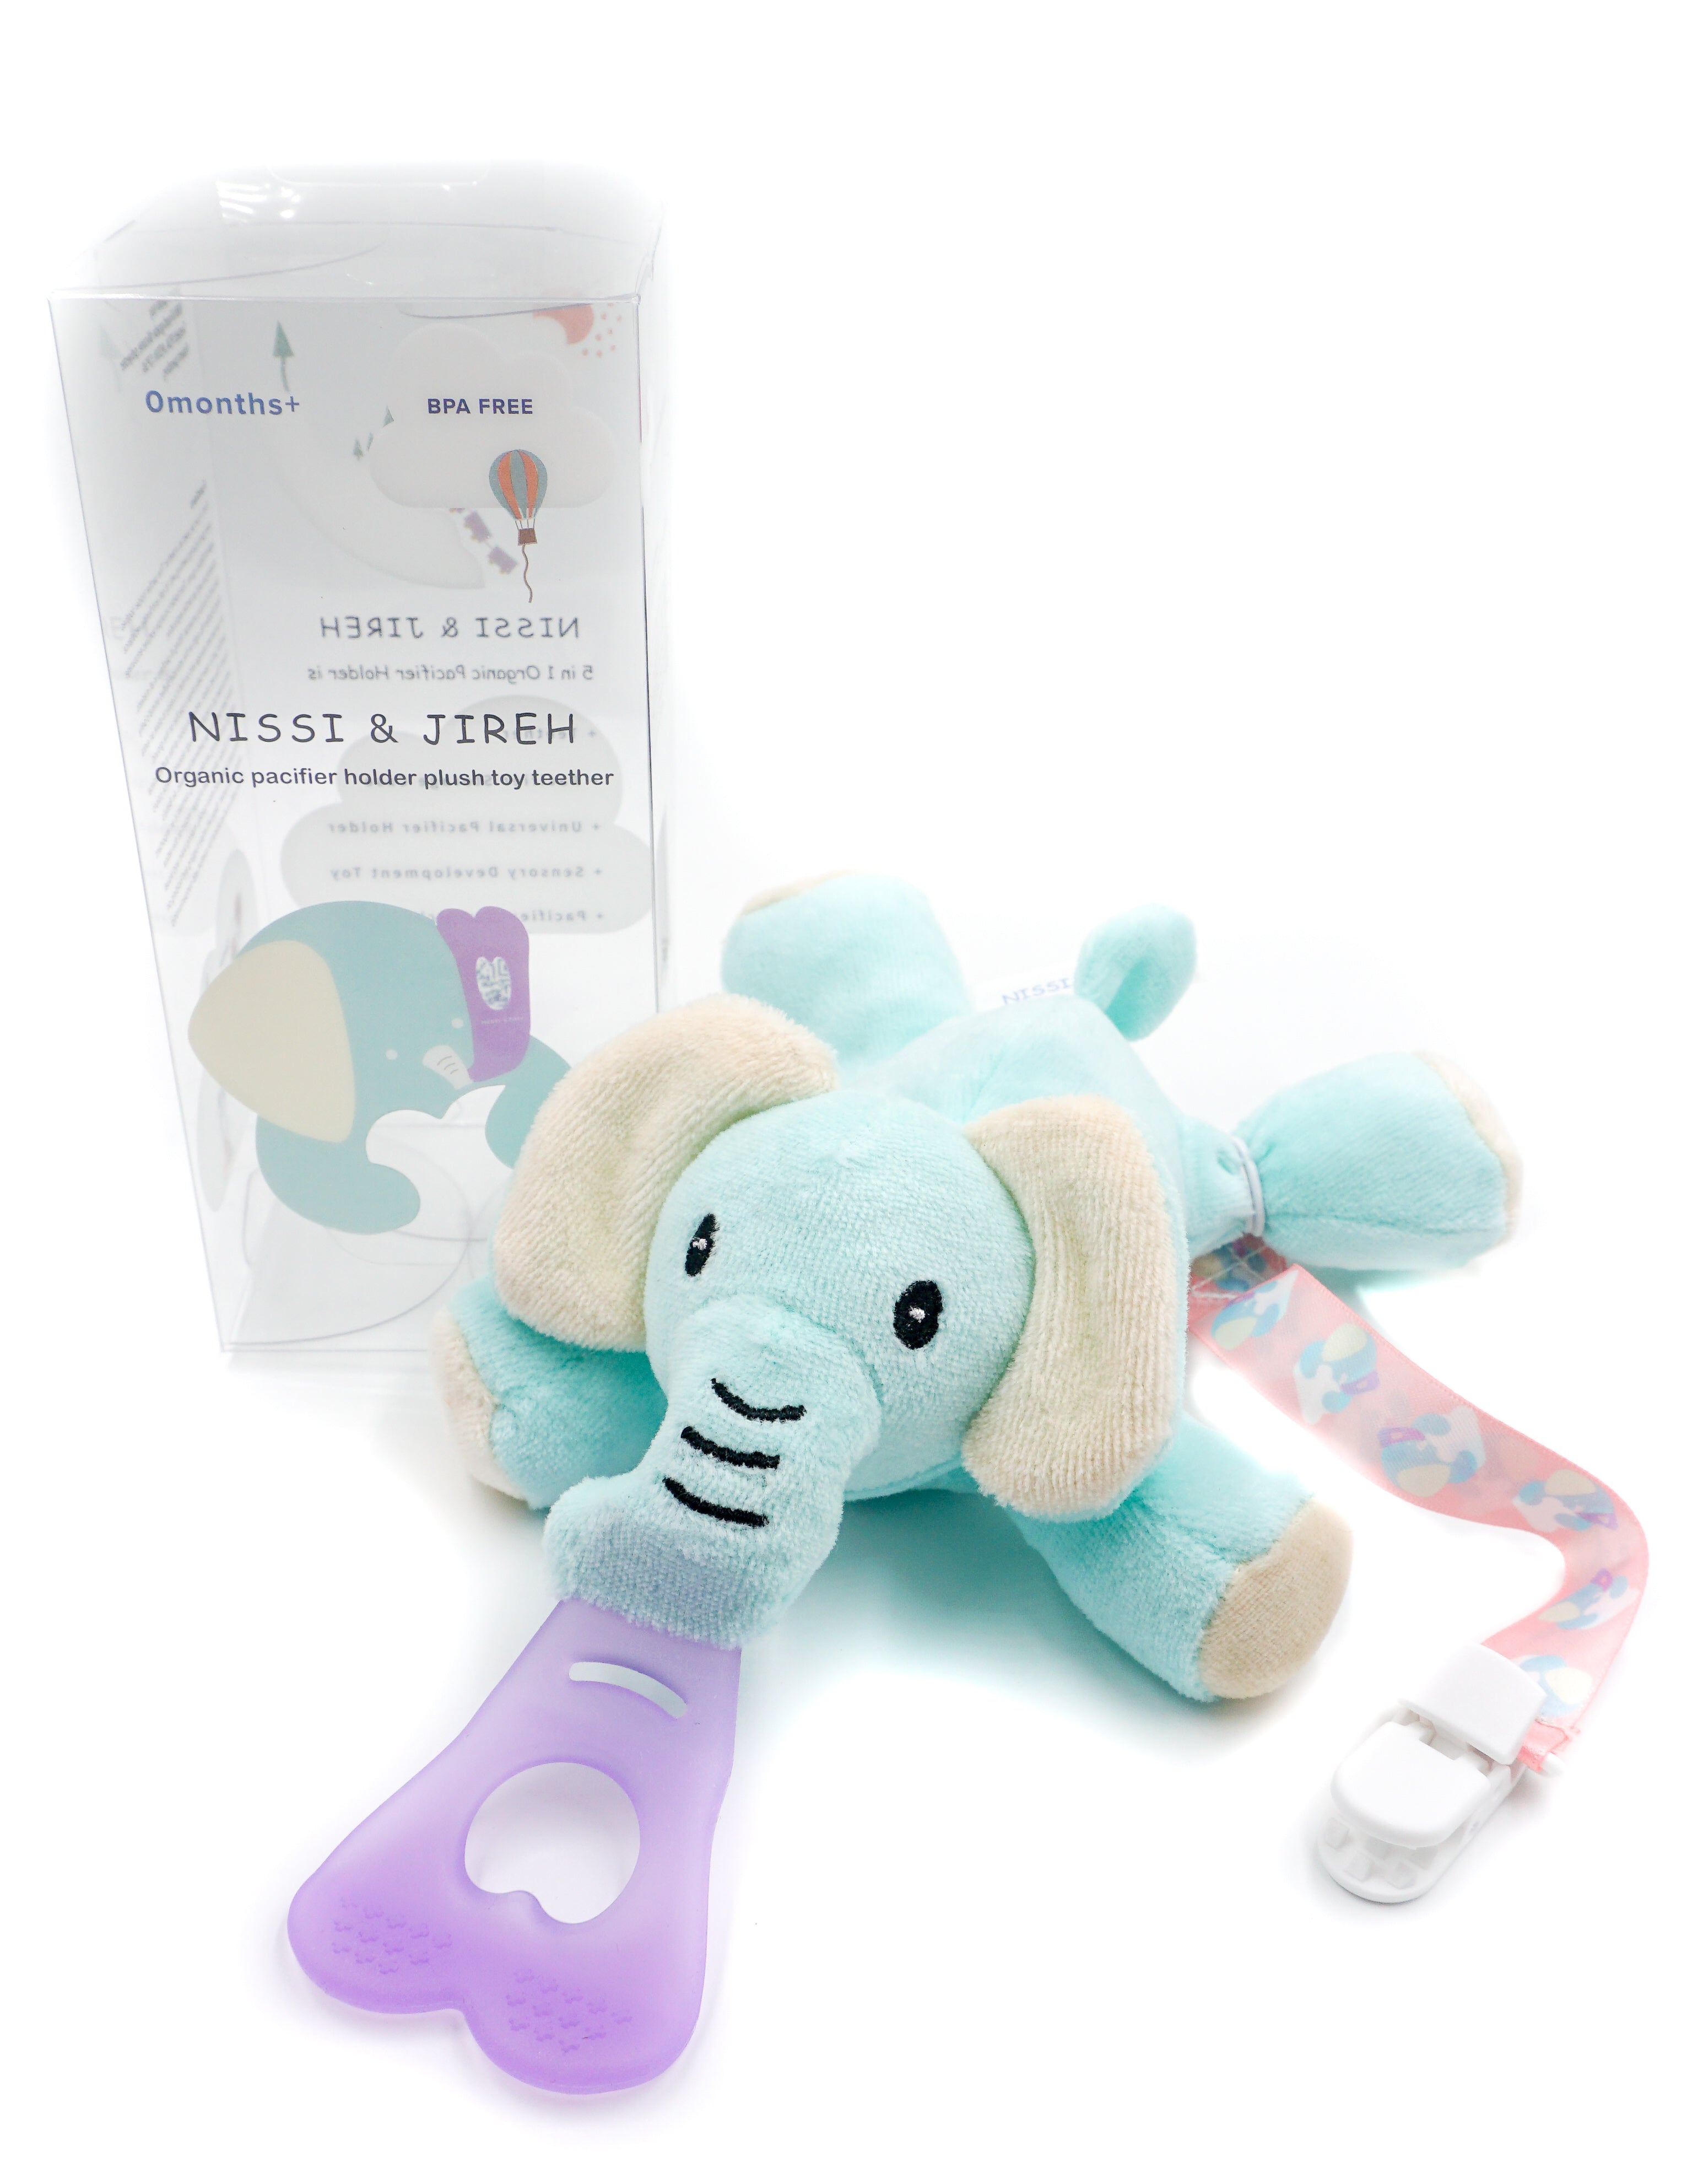 5 in 1 Organic Teething Toy and Detachable Pacifier Holder, Elephant - nissi-jireh